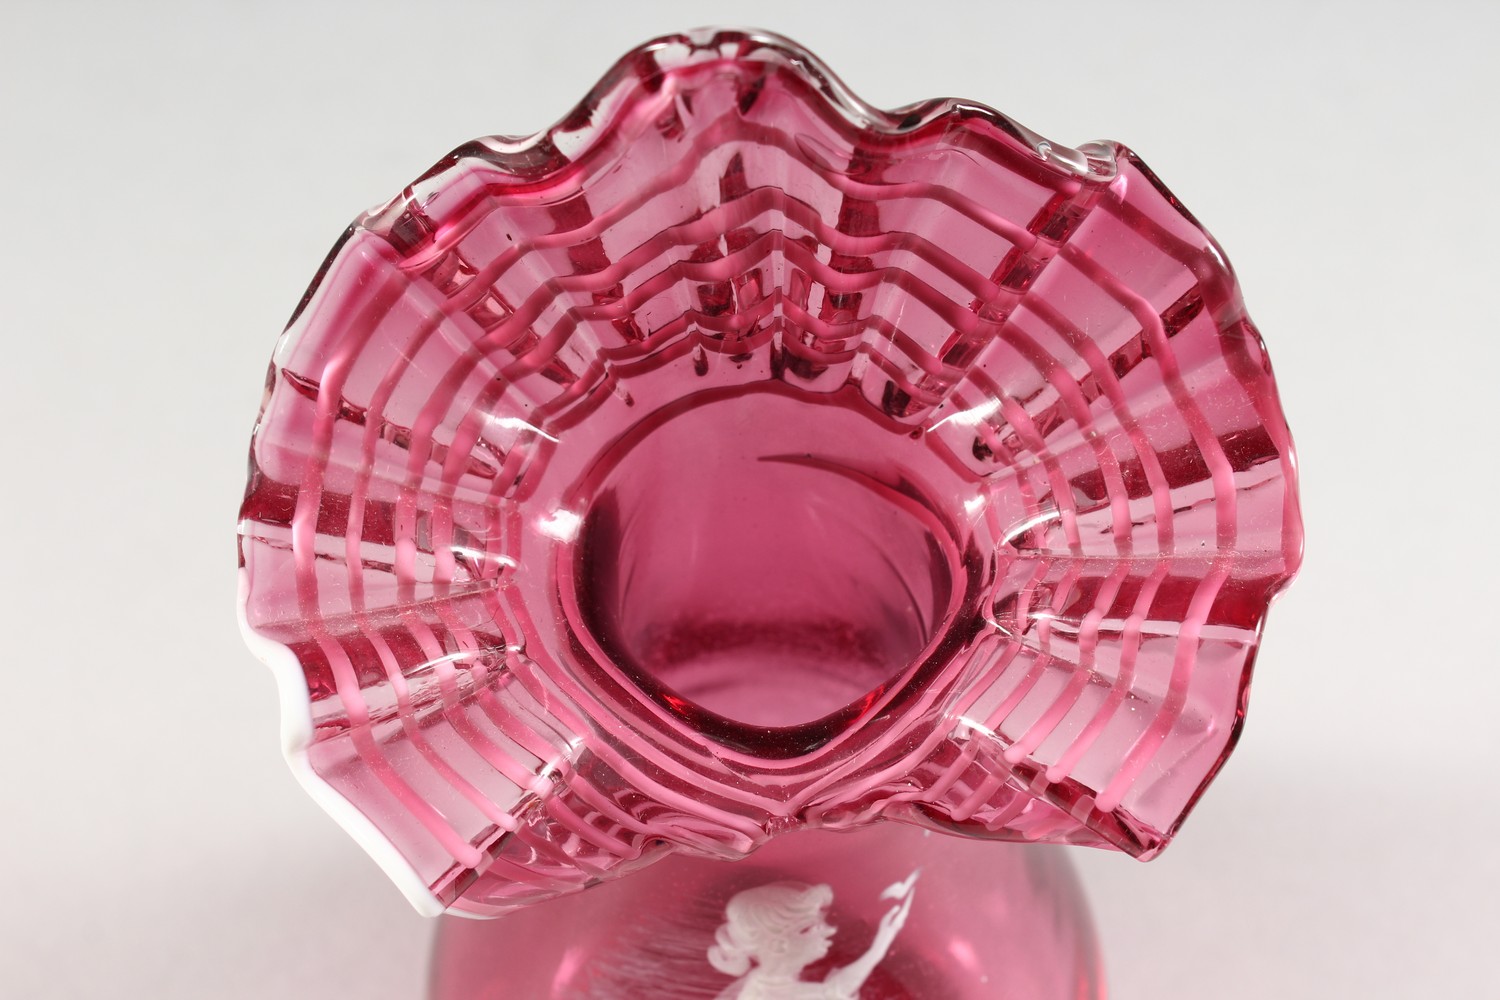 A CRANBERRY MARY GREGORY VASE. - Image 10 of 11